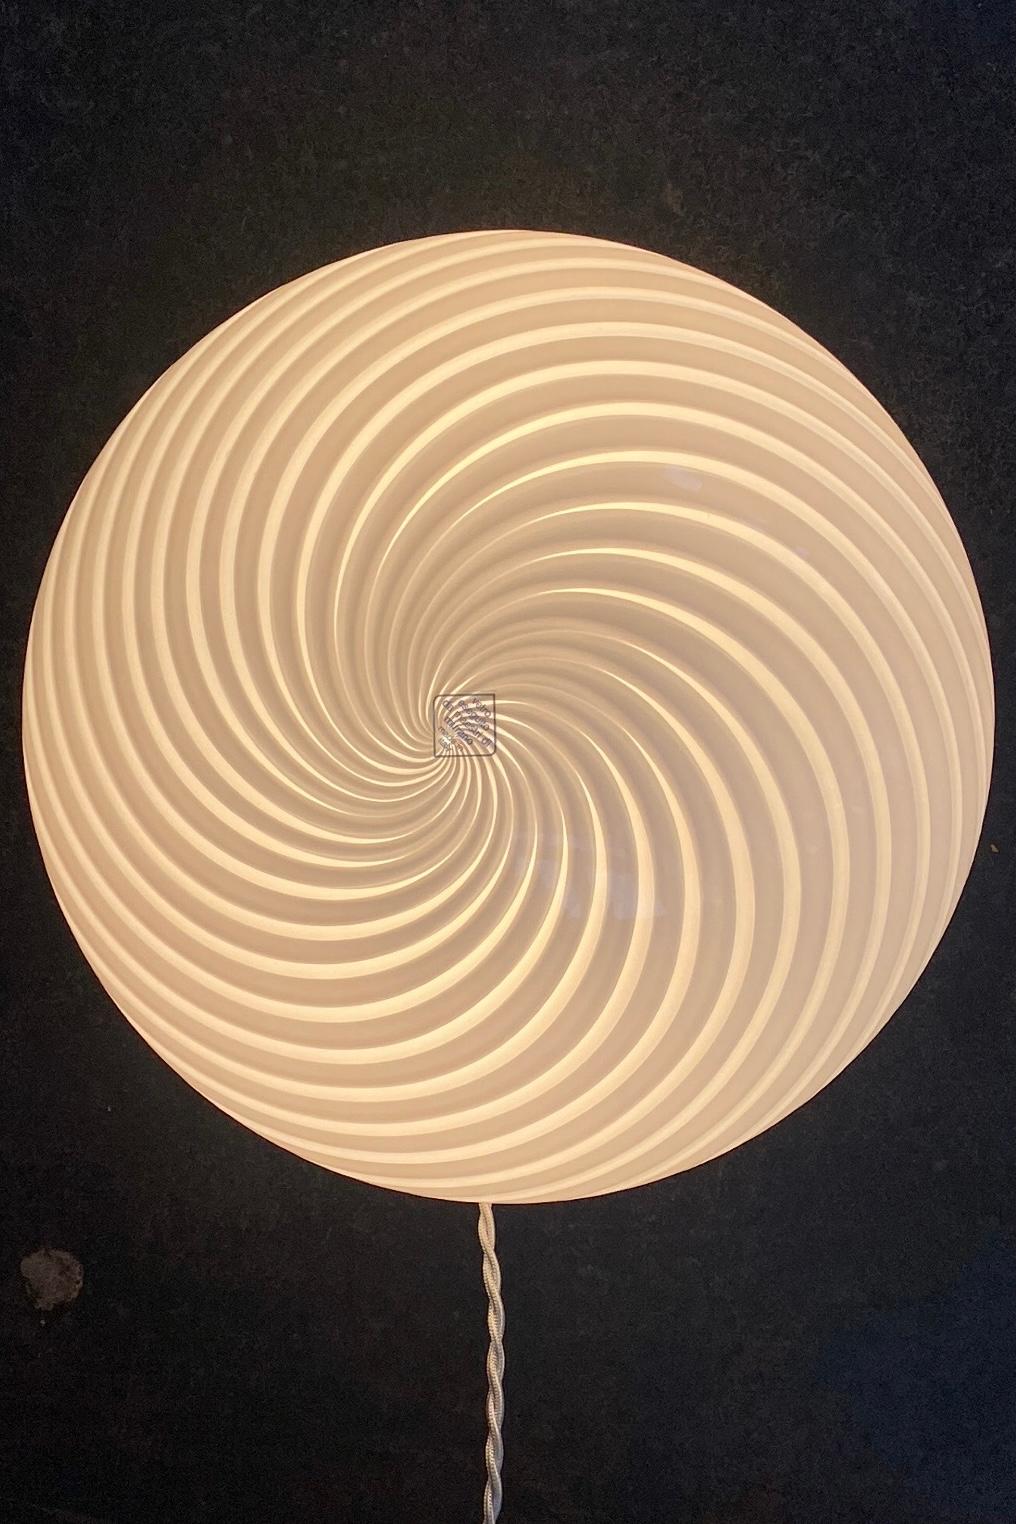 Paid of unused (new) vintage Murano glass ceiling lamp with white swirl pattern. Can be used both as a ceiling lamp or as a wall lamp. 2x E27 socket. Handmade in Italy, 1970s, and comes with a new white metal backplate.
D: 36 cm H: 15 cm
